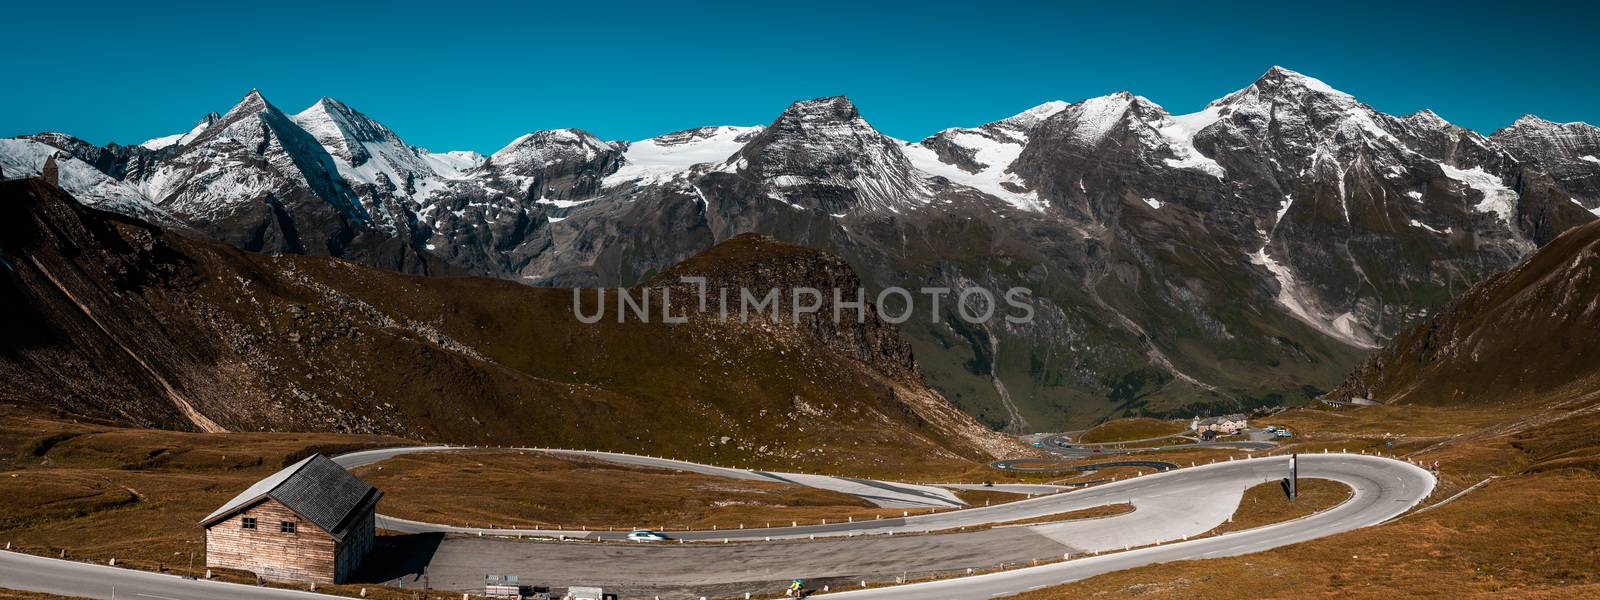 Grossglockner High Alpine Road in Austria Alps. Wide Stitched Panoramic Image. Outdoor Adventure Panorama.